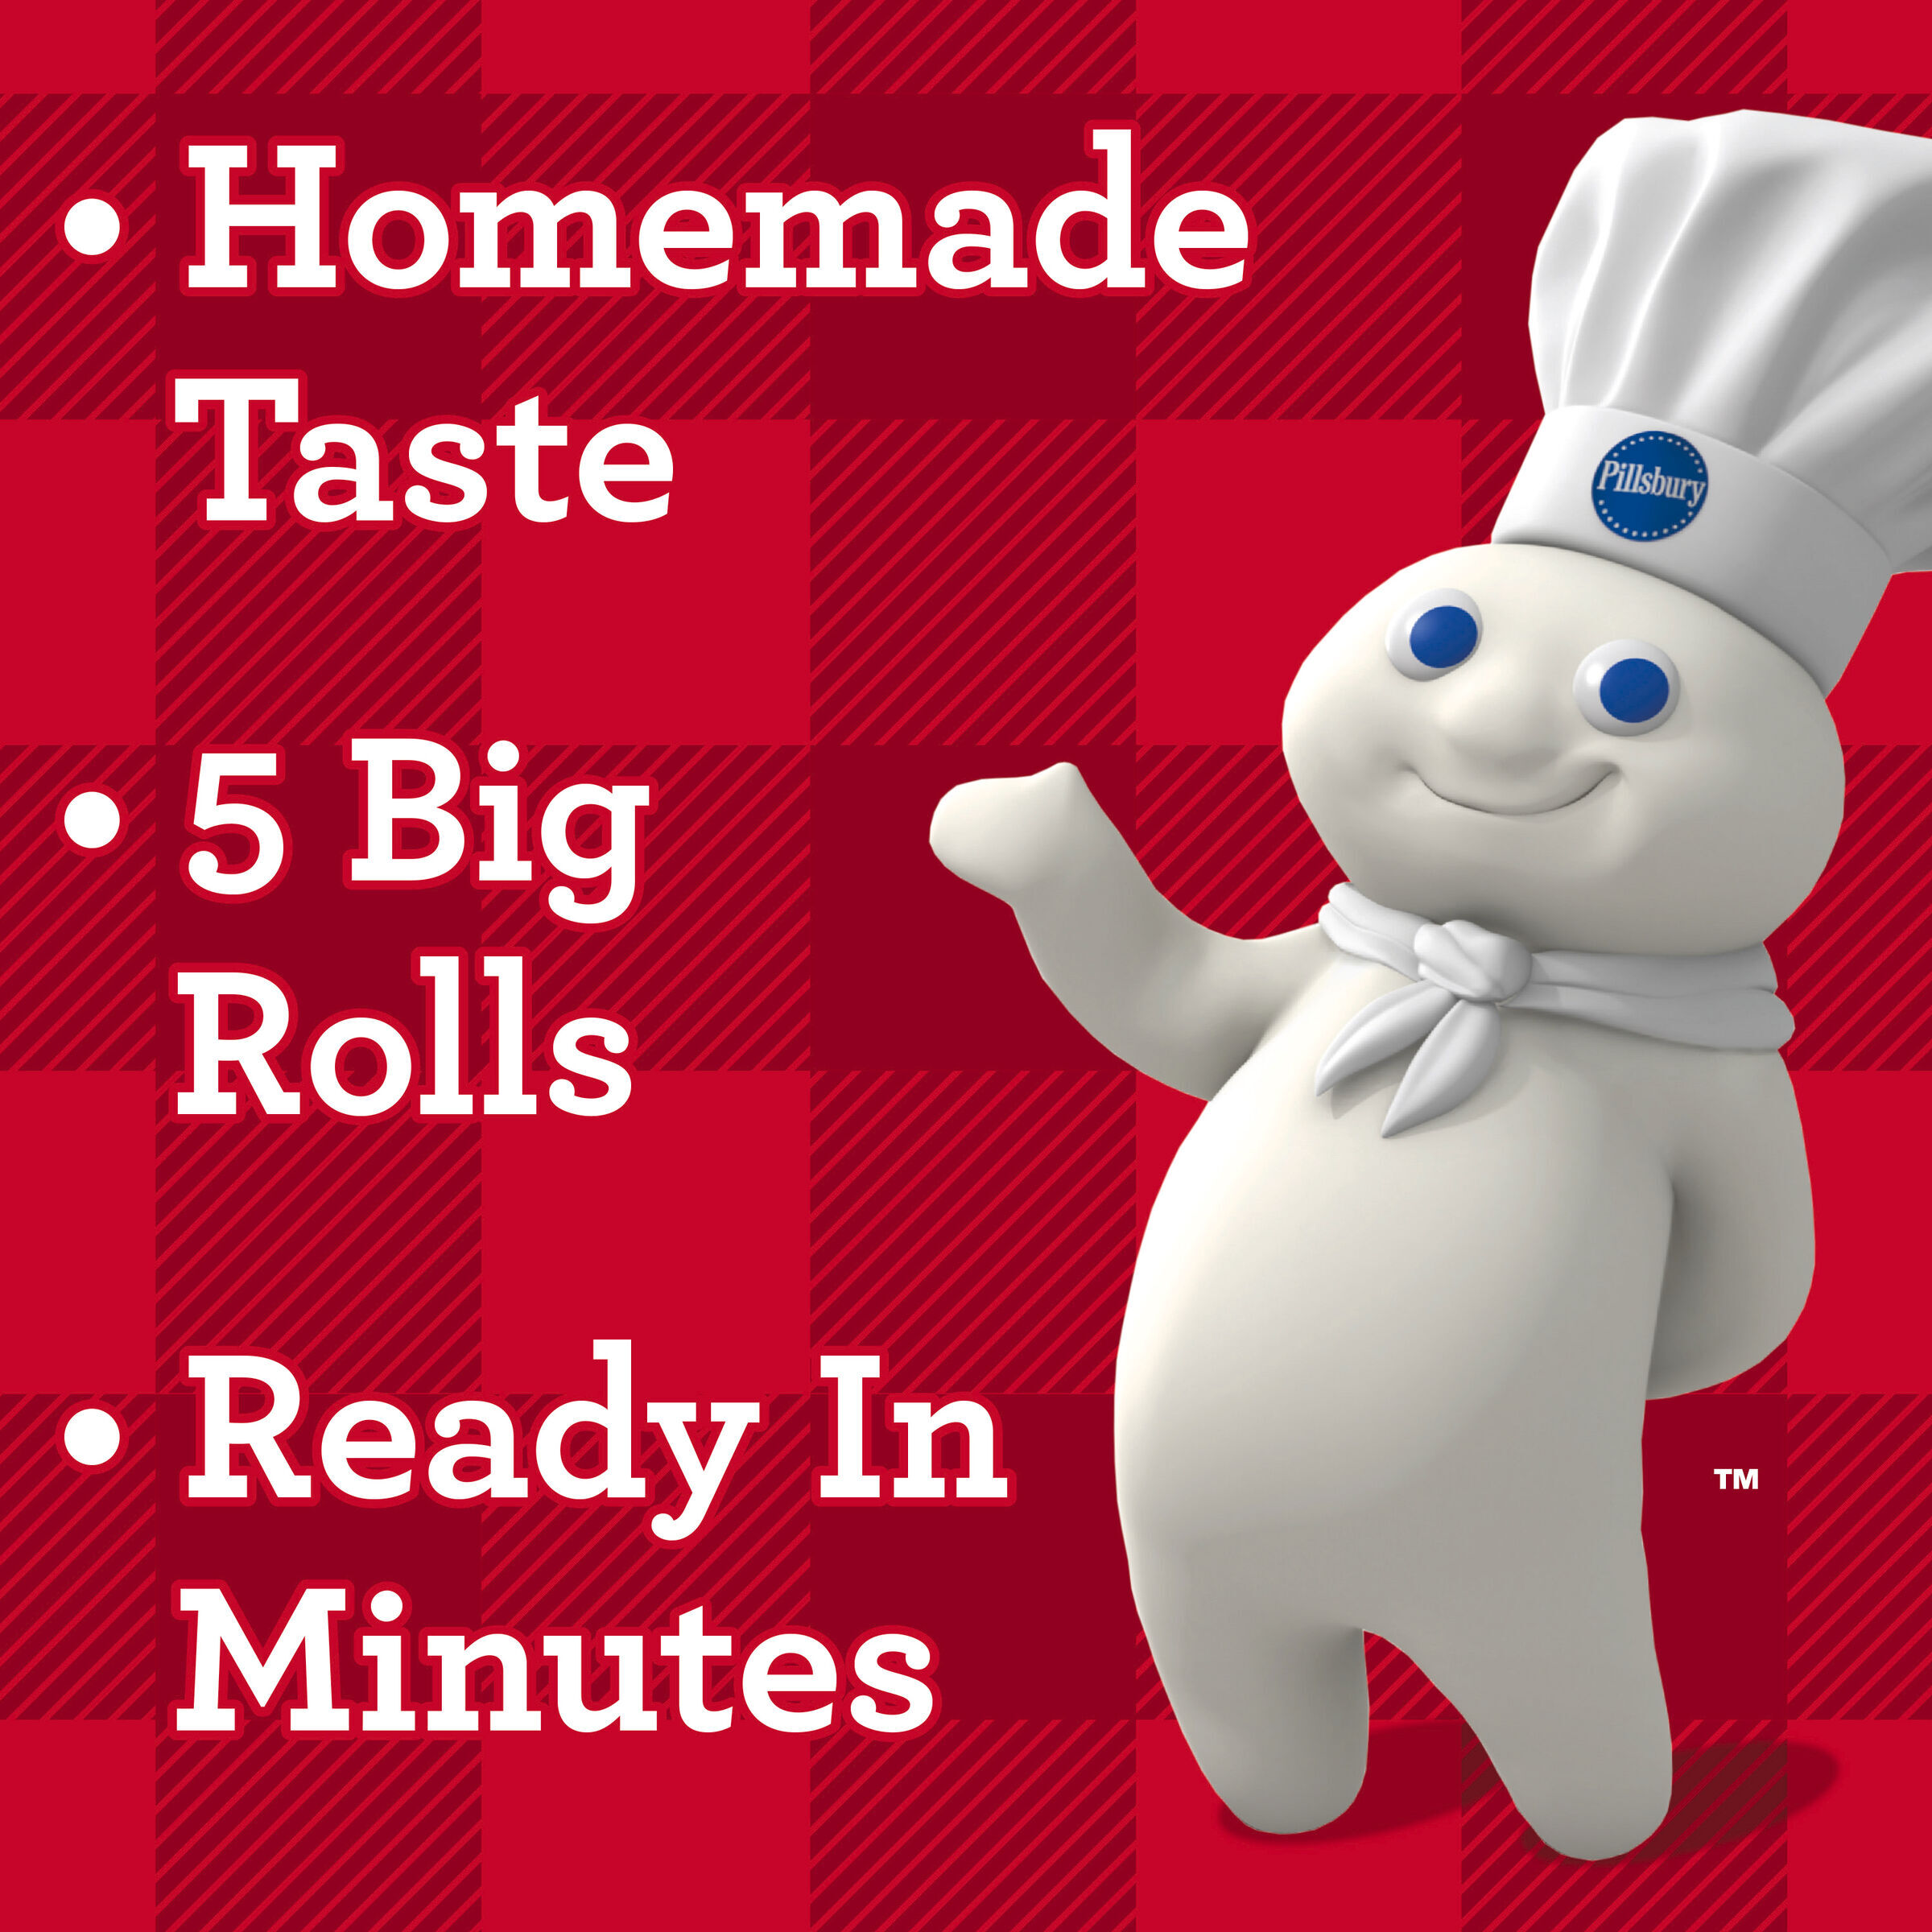 Pillsbury Grands! Holiday Edition Hot Cocoa Flavored Cinnamon Rolls with Icing, 5 Rolls - image 4 of 10